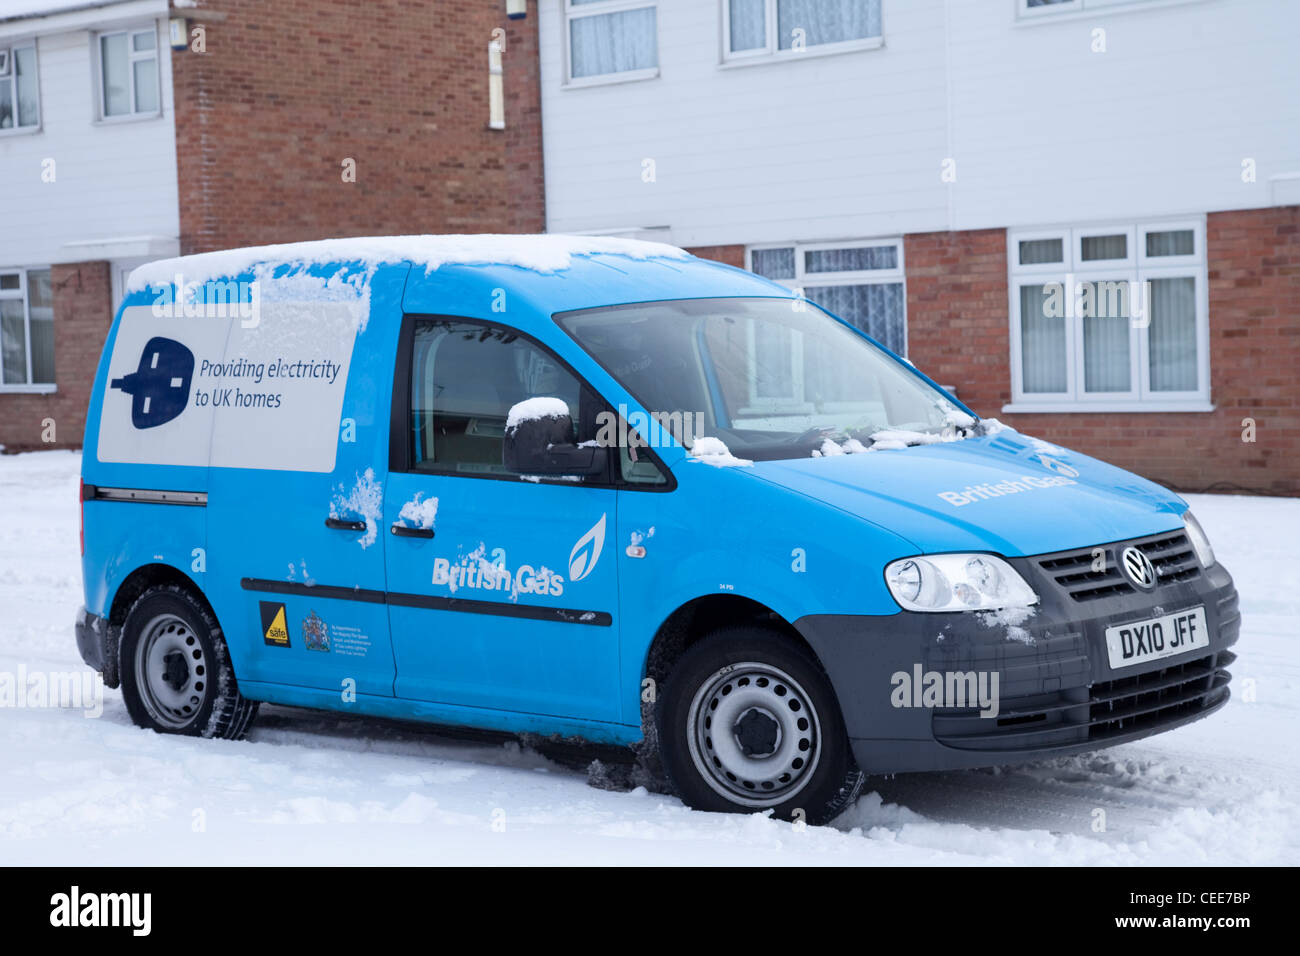 A British Gas Centrica energy supplier engineers van parked outside a residential house in the snow Nottingham England UK Stock Photo